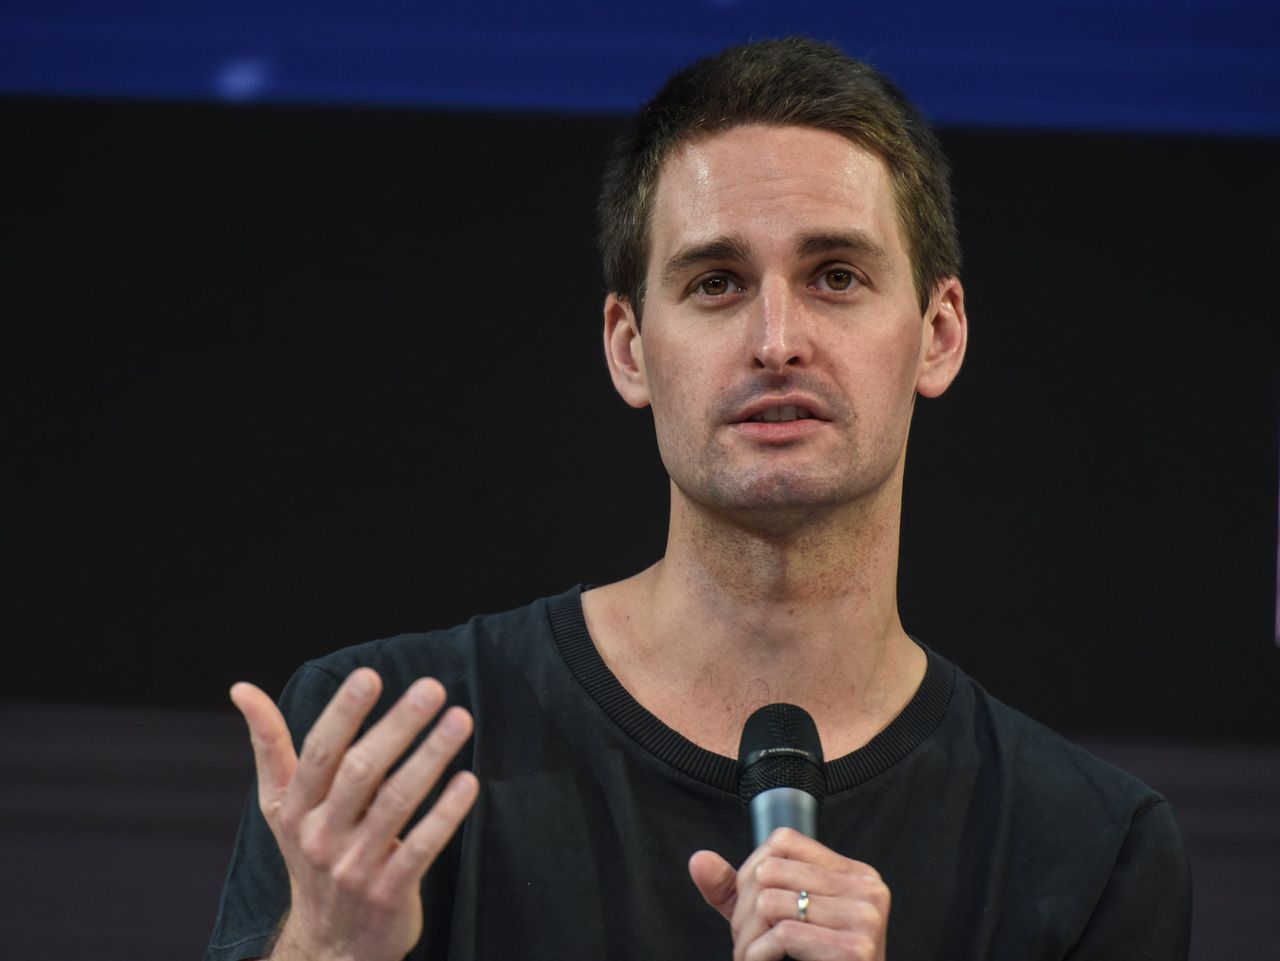 Snapchat CEO says Snapchat vets all political ads. Image via Getty Images.